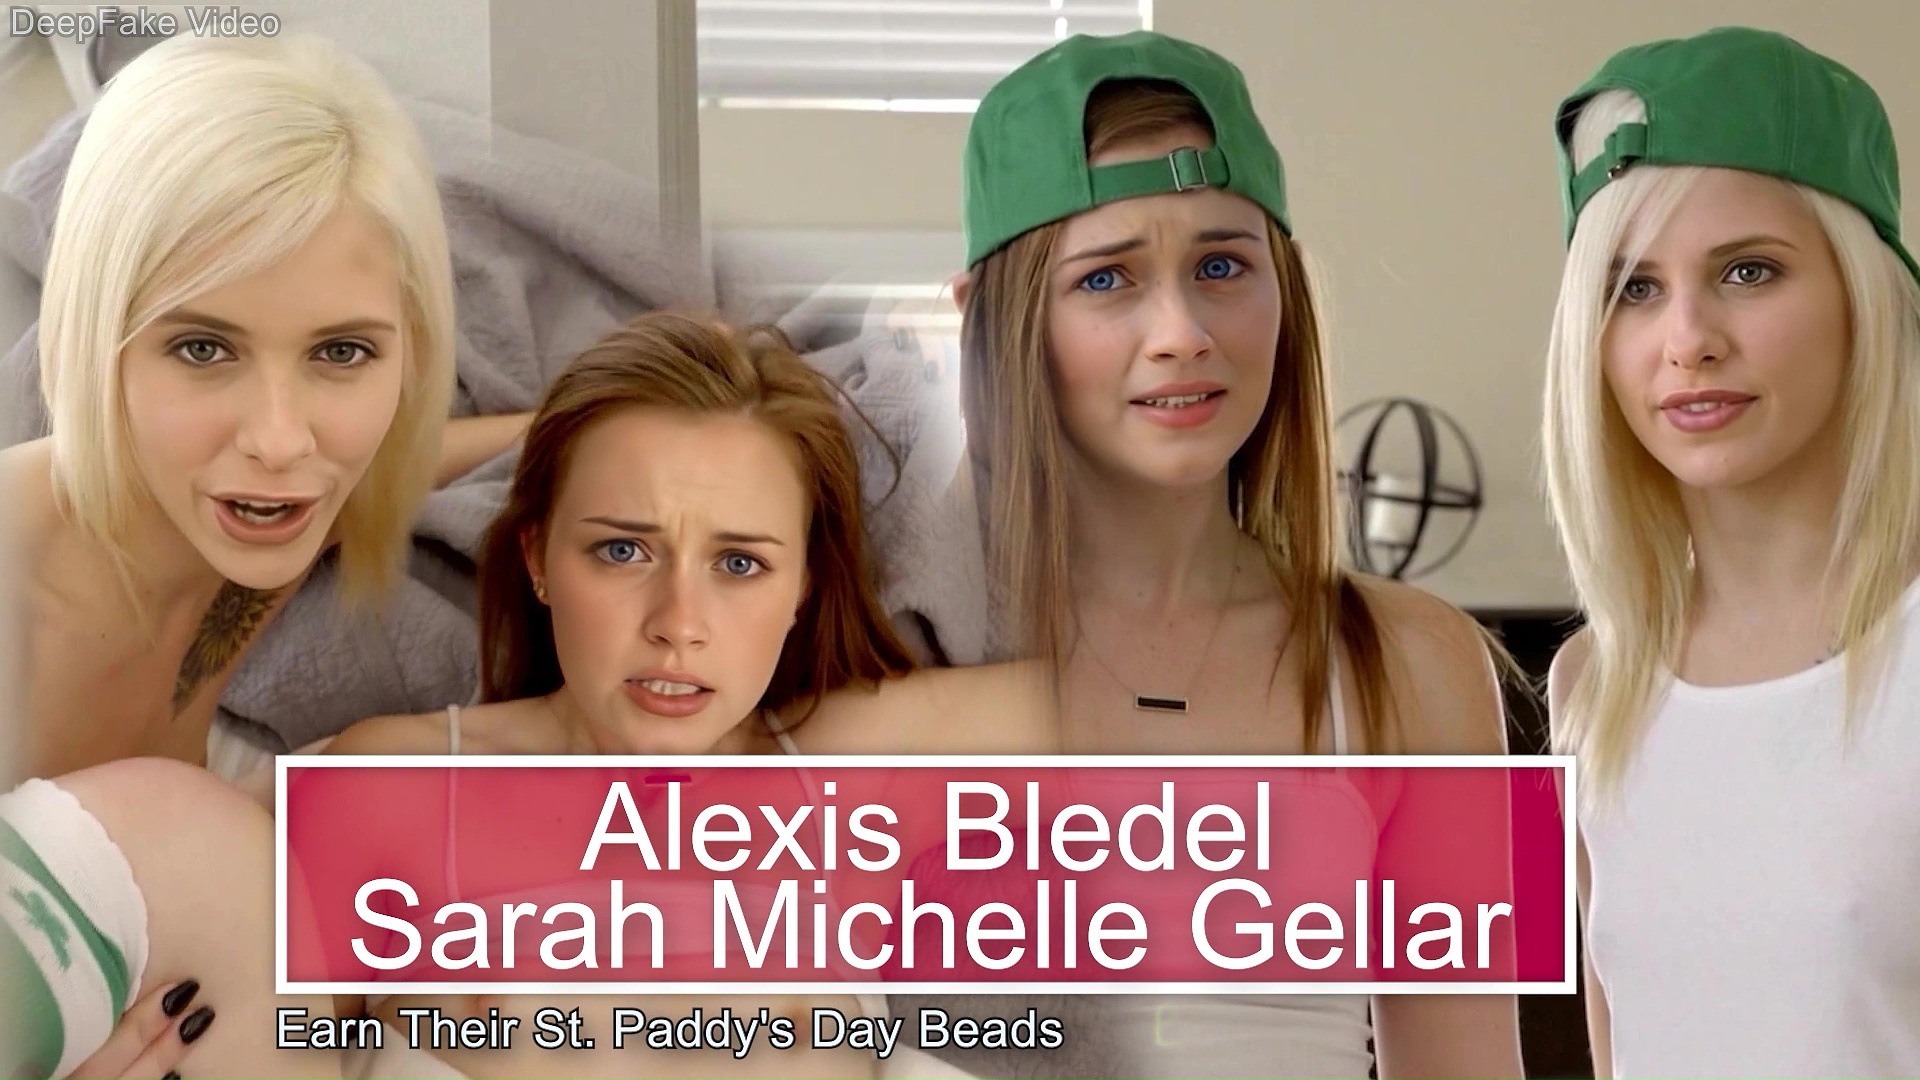 Alexis Bledel and Sarah Michele Gellar - Earn Their St Paddy's Day Beads - Trailer